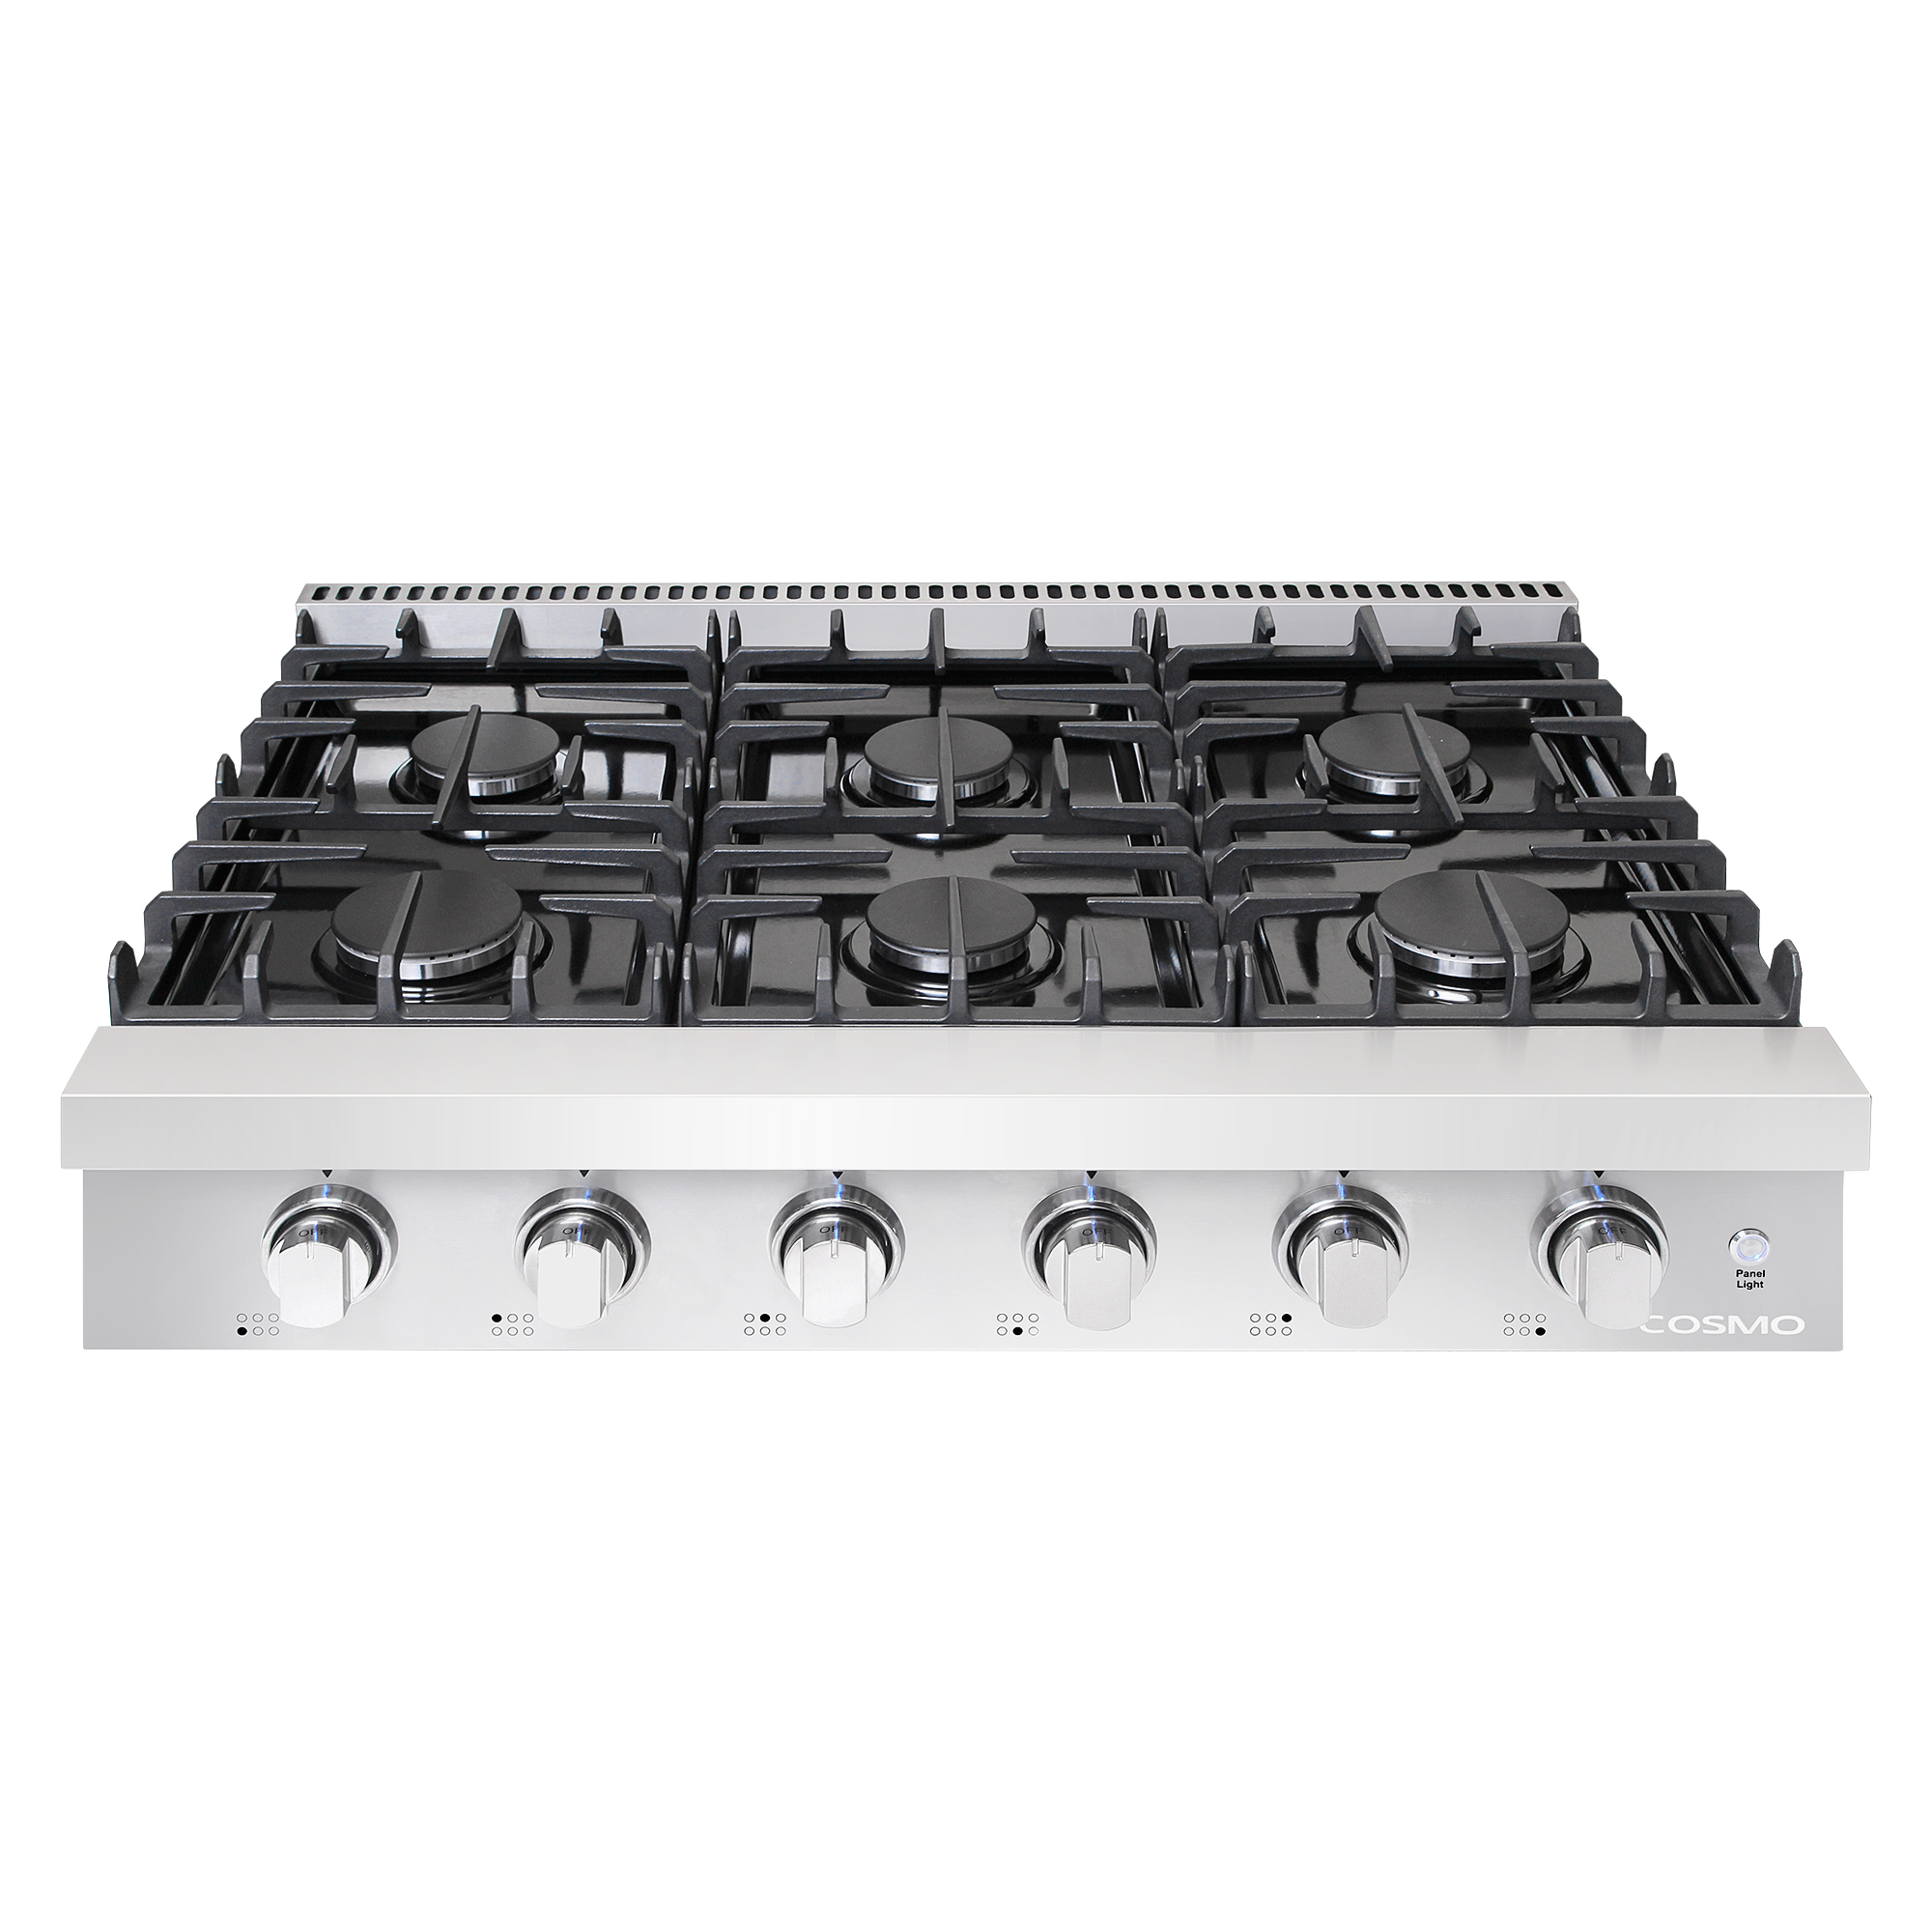 Dishwasher-Safe Cast Iron Grate Metal Front Knob Control Panel Stainless-Steel Dual Ring Stove 6 Italian-Made Burner Range-Top Cosmo COS-GRT366| Pro-Style Slide-In Counter Gas-Cooktop 36 inch 